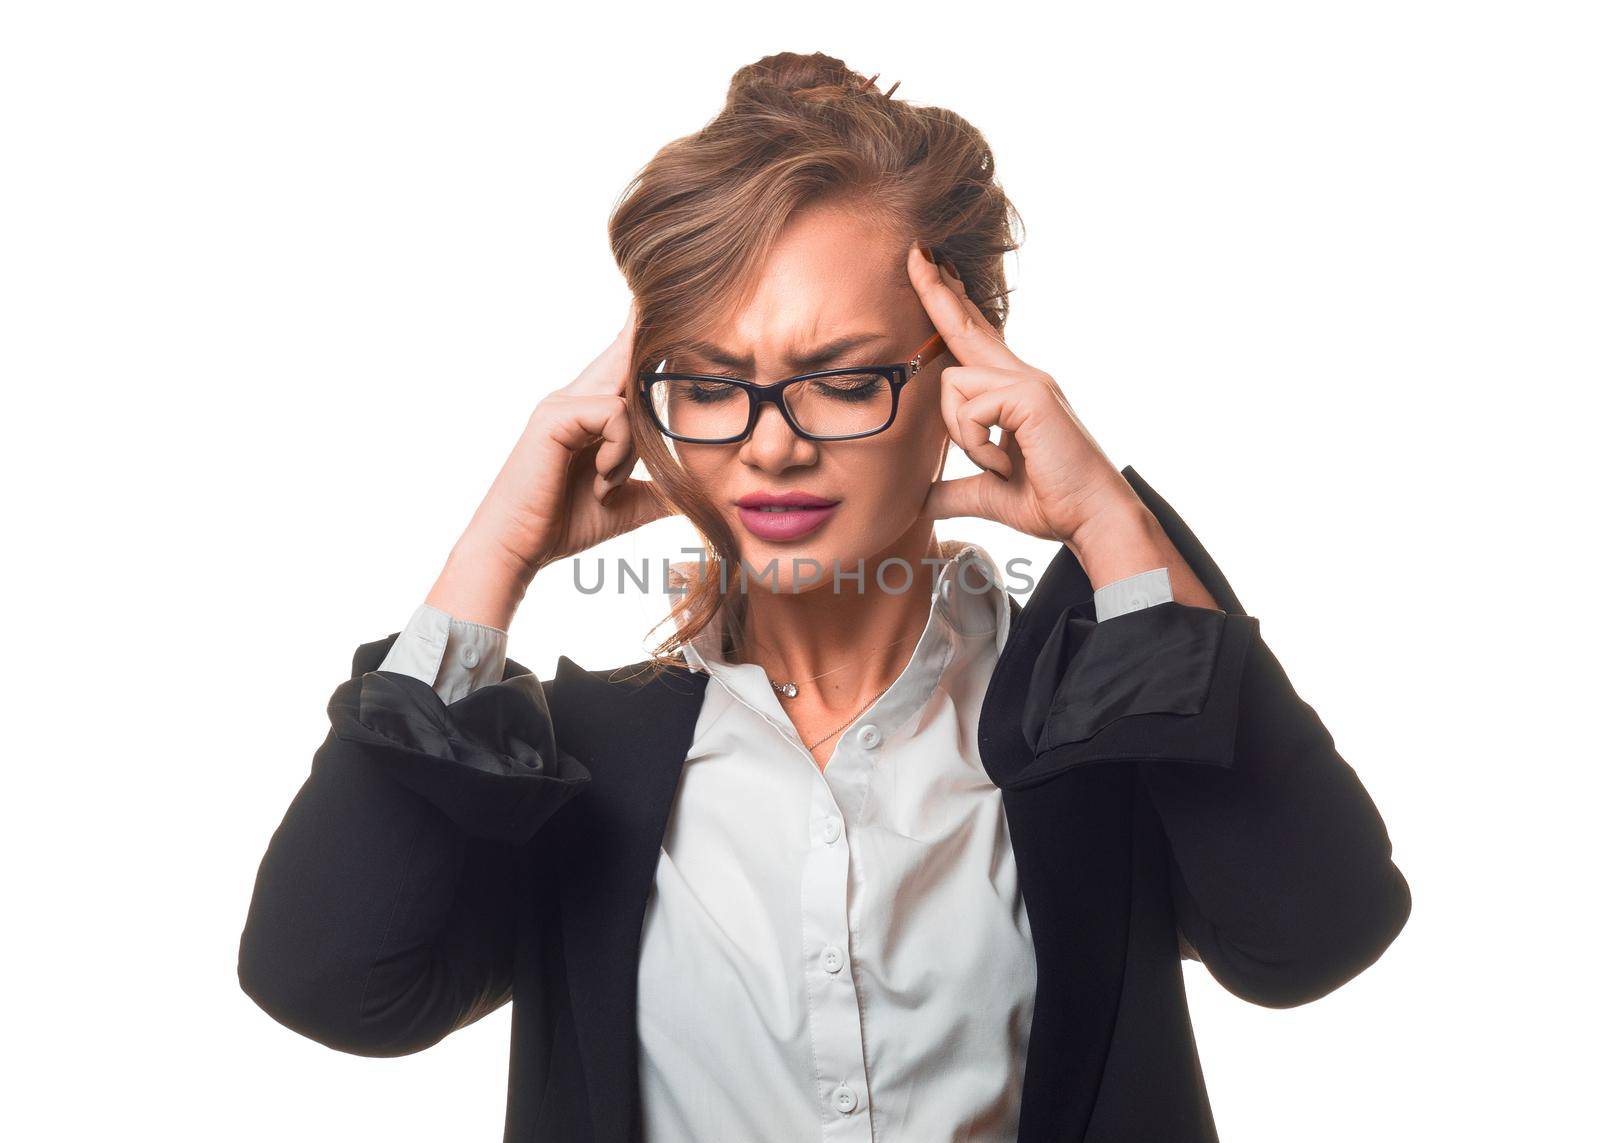 A woman massages the bridge of her nose due to eye fatigue and overwork. Serious business woman is tired. Isolated over white background.